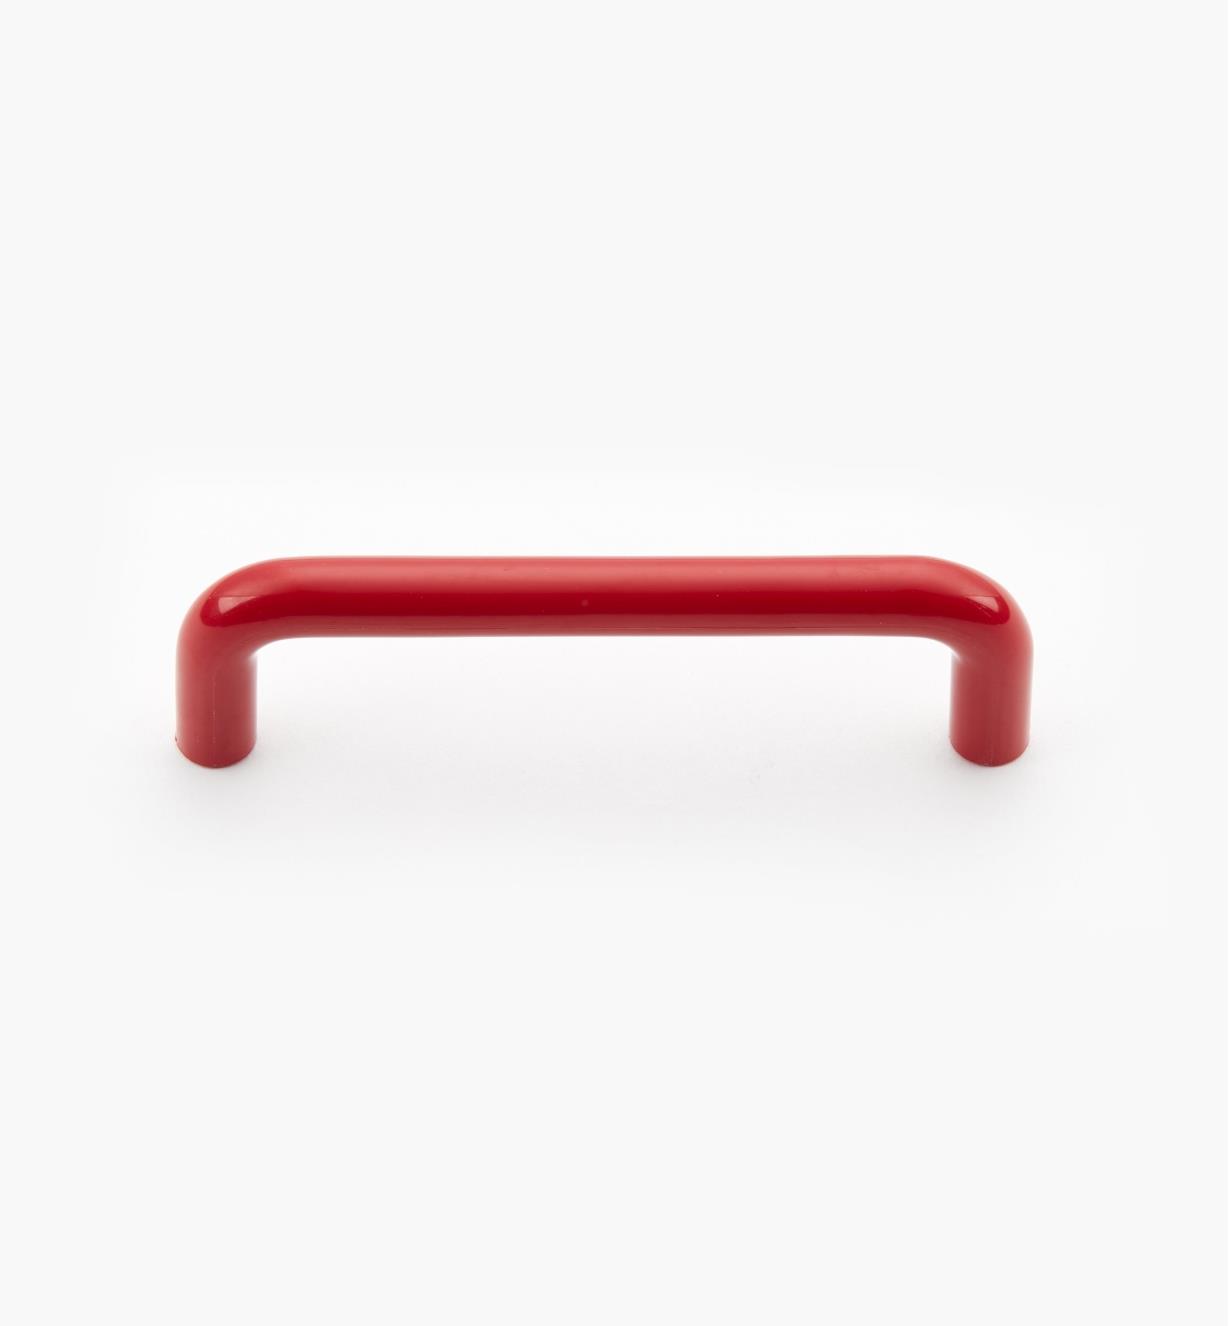 00W3811 - 96mm Red Handle